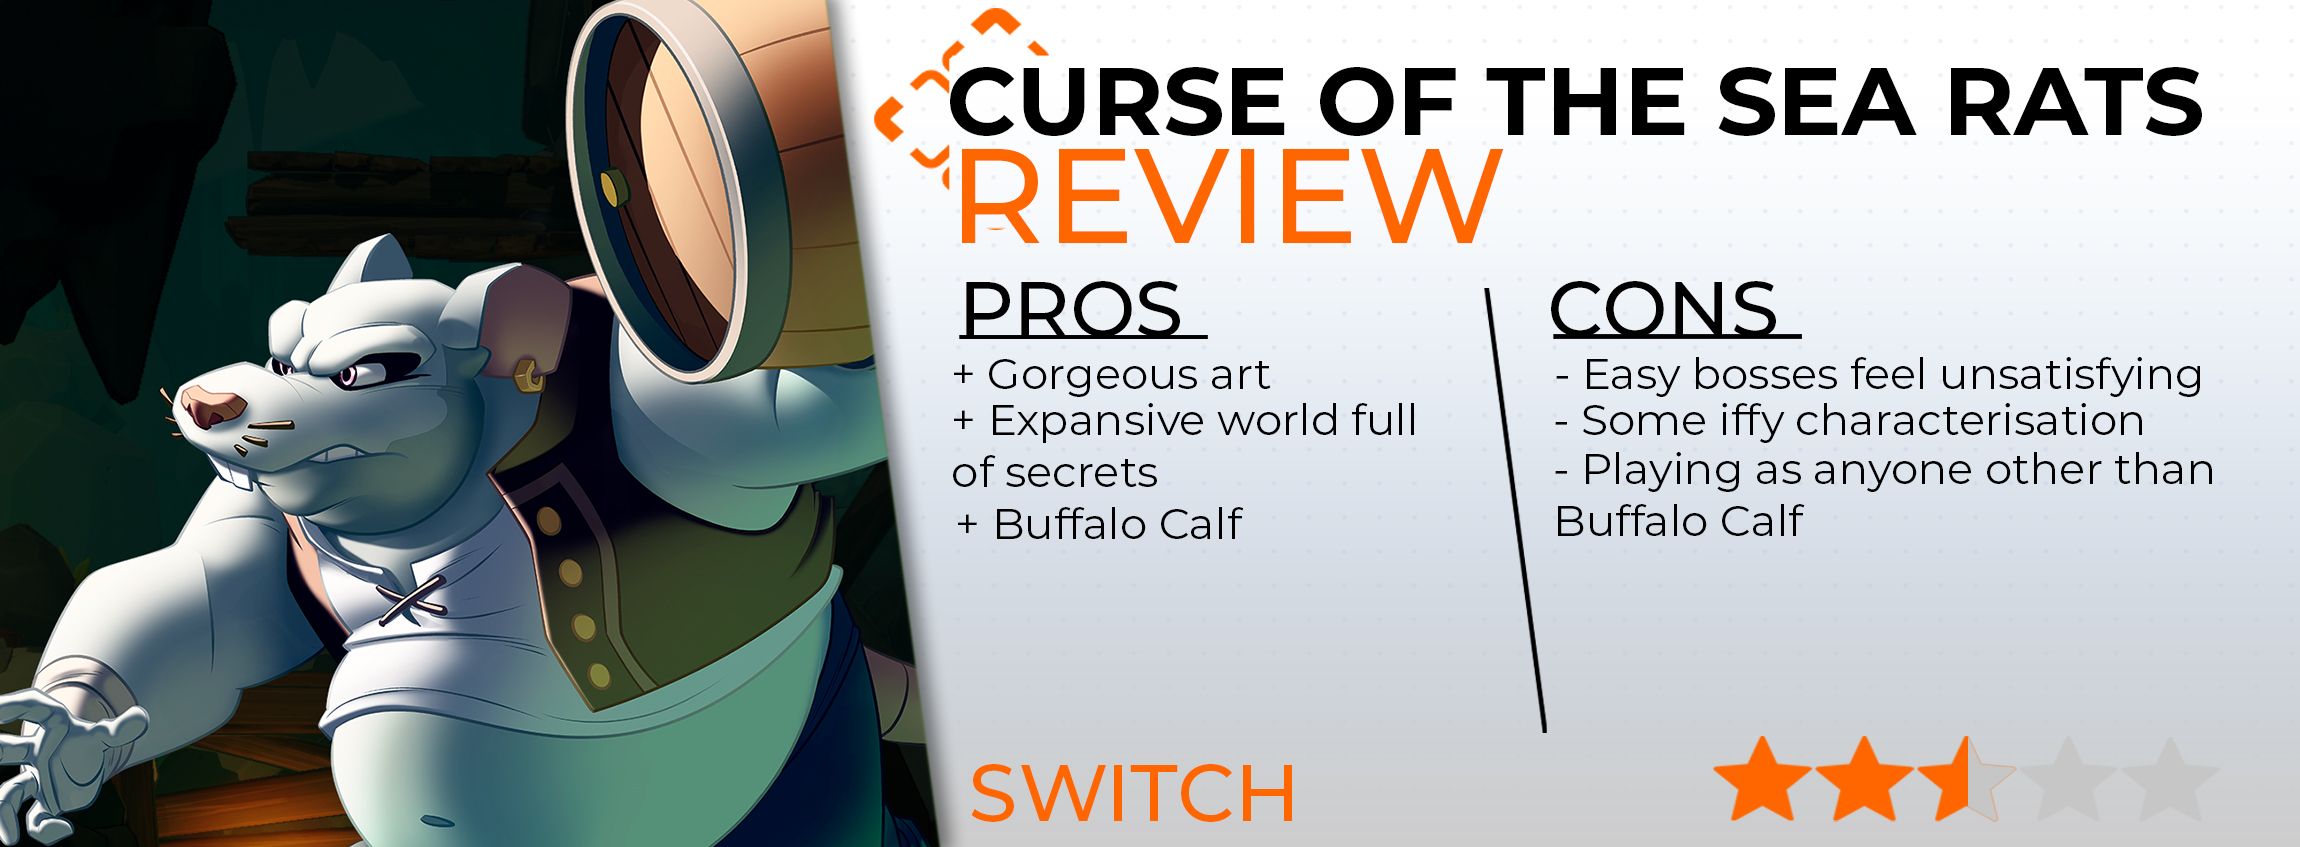 Curse of the Sea Rats Review Card